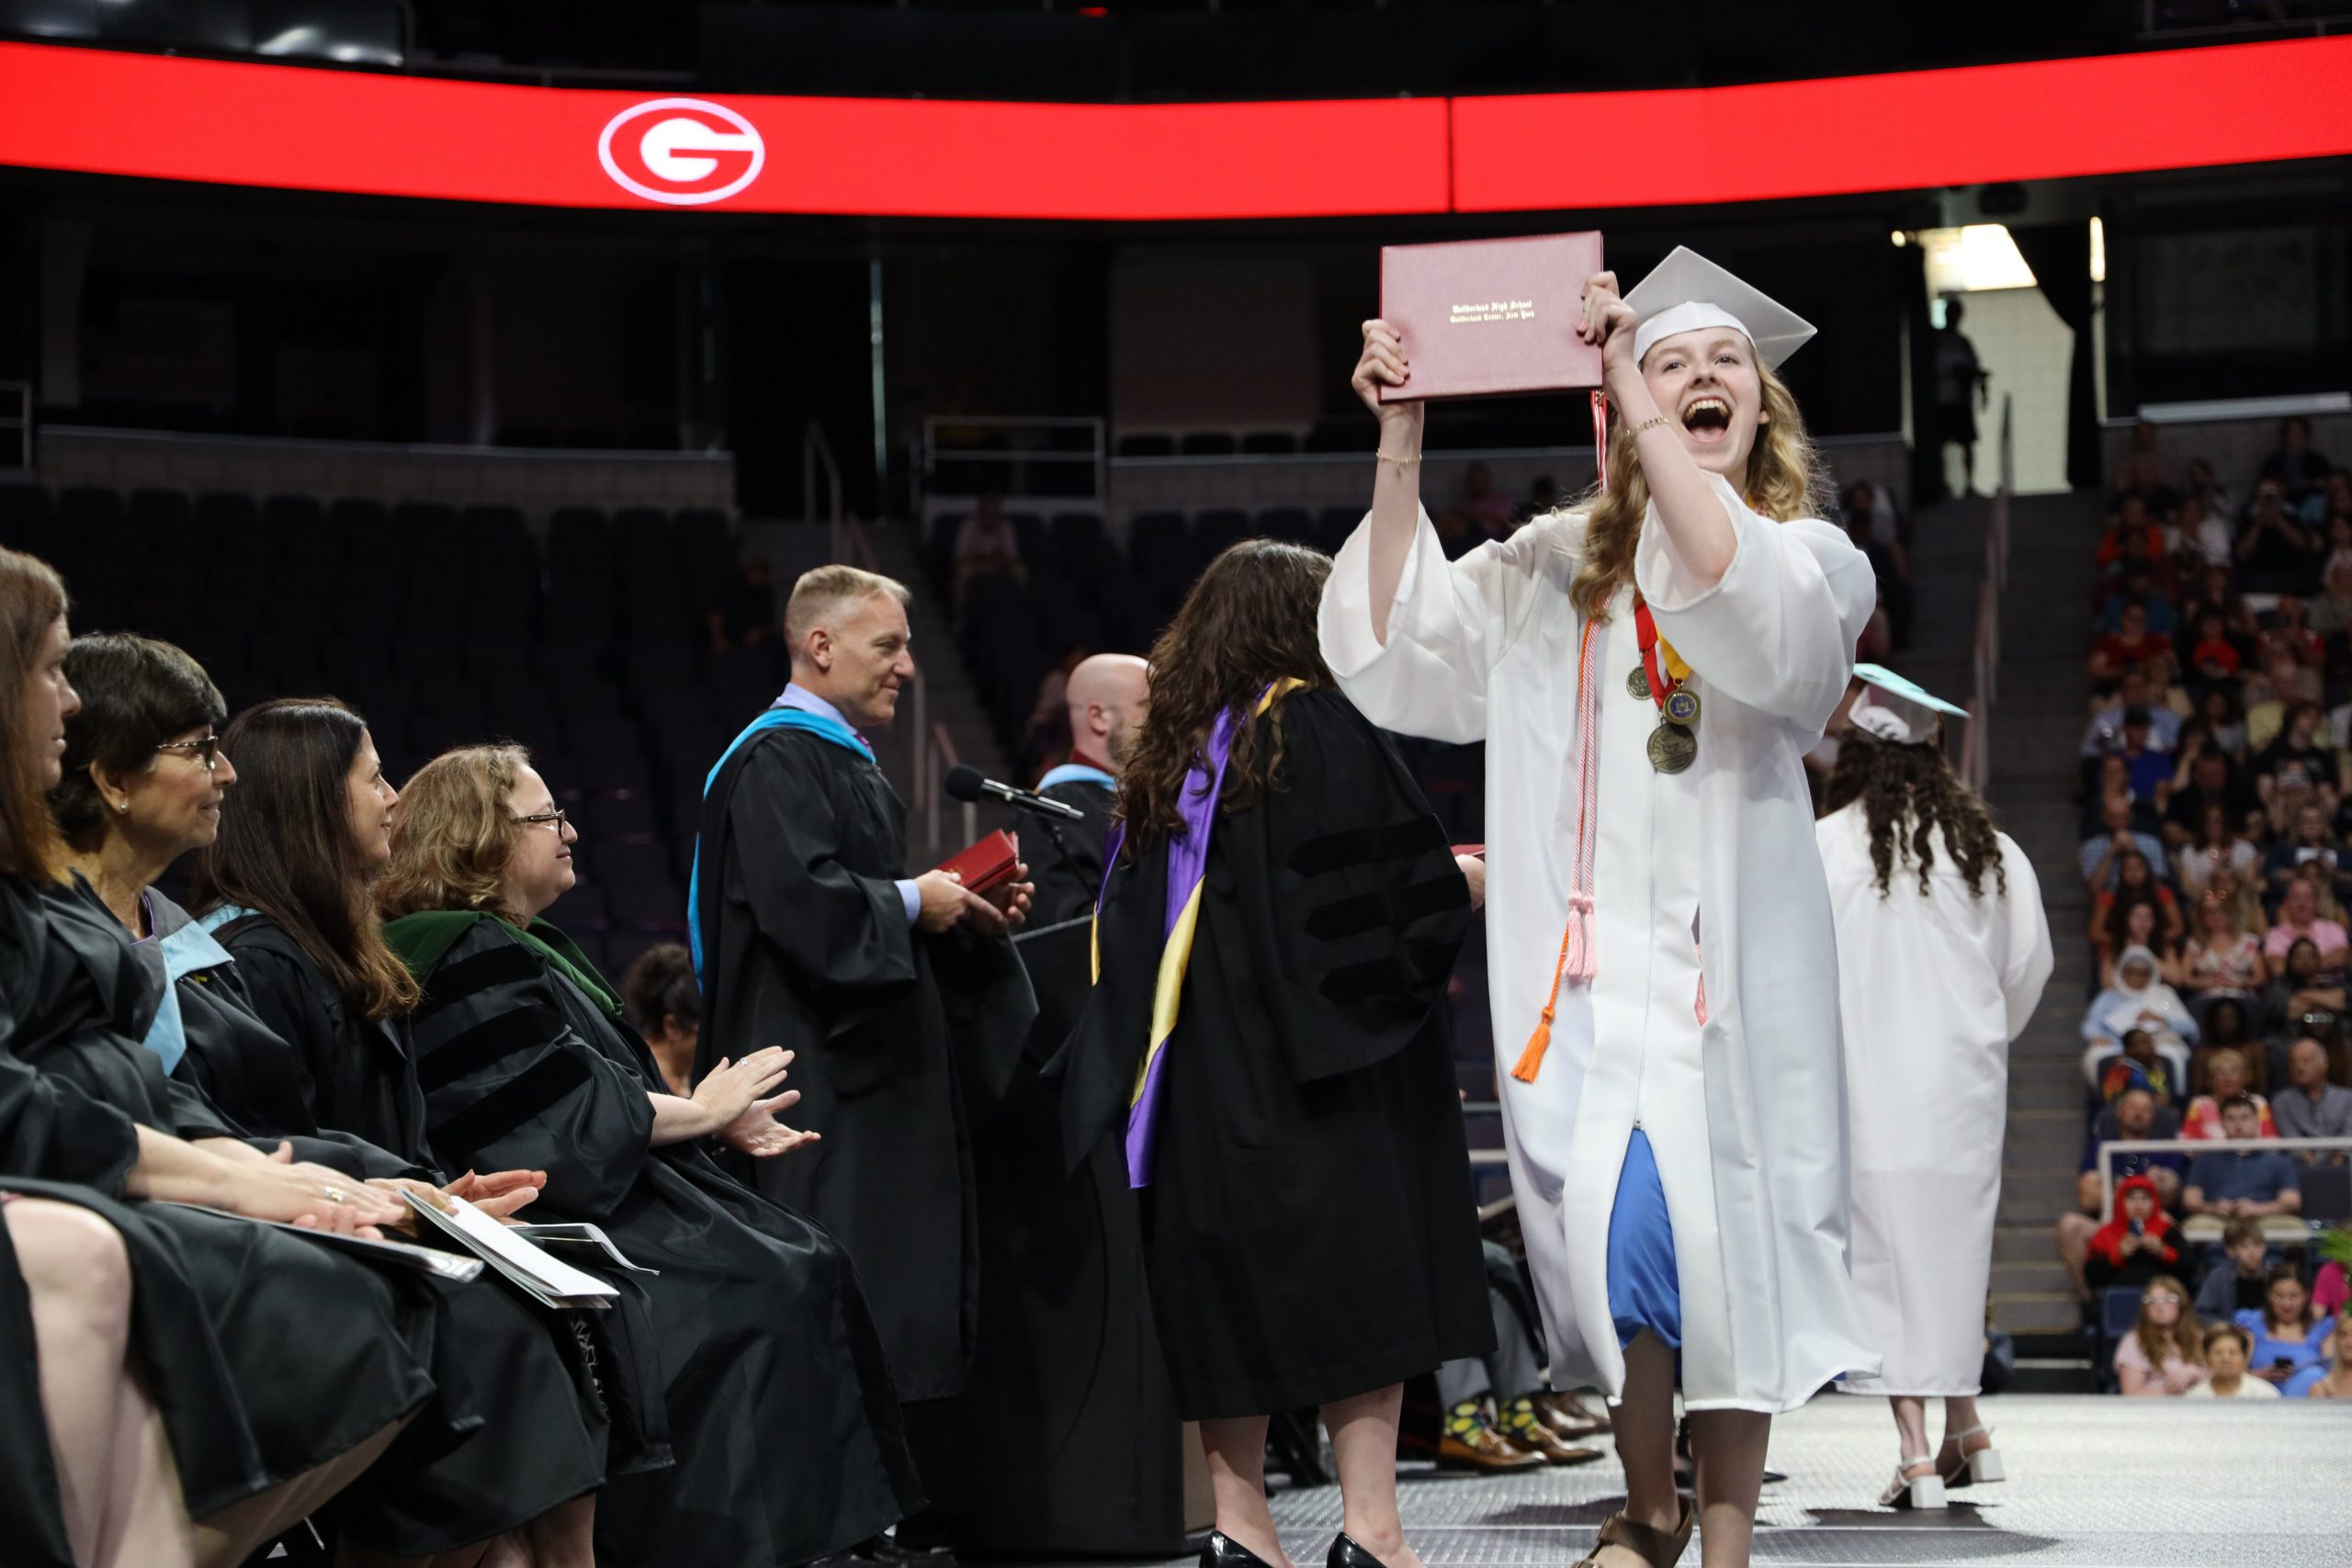 Graduate in a white cap and gown holding up her diploma on stage and smiling.